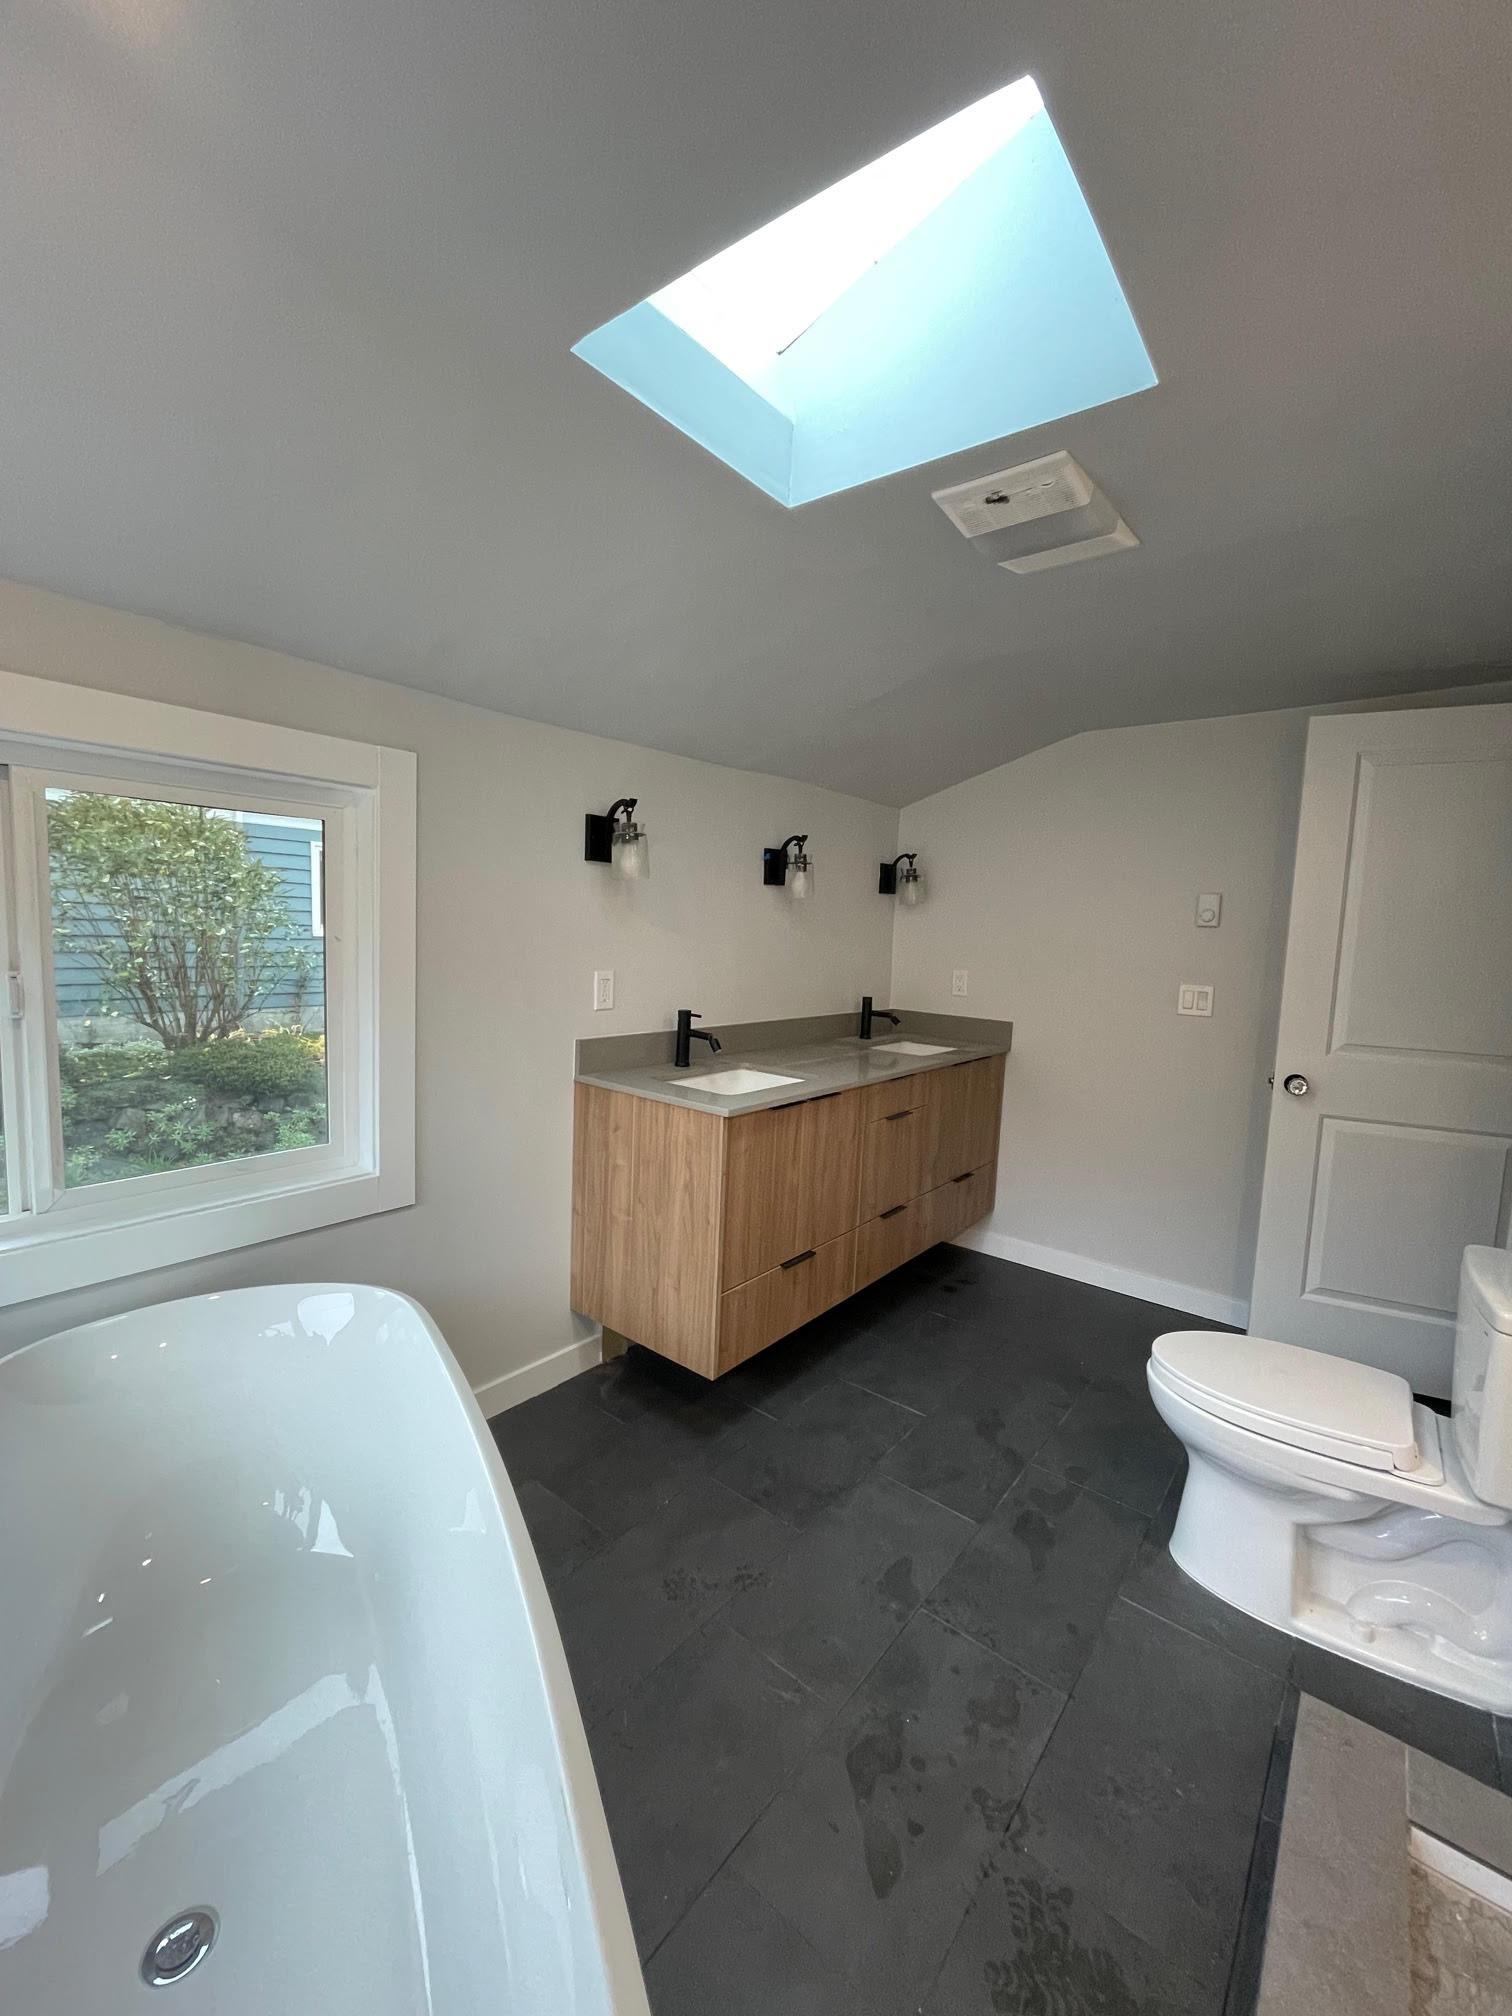 Bathroom and Home Remodel